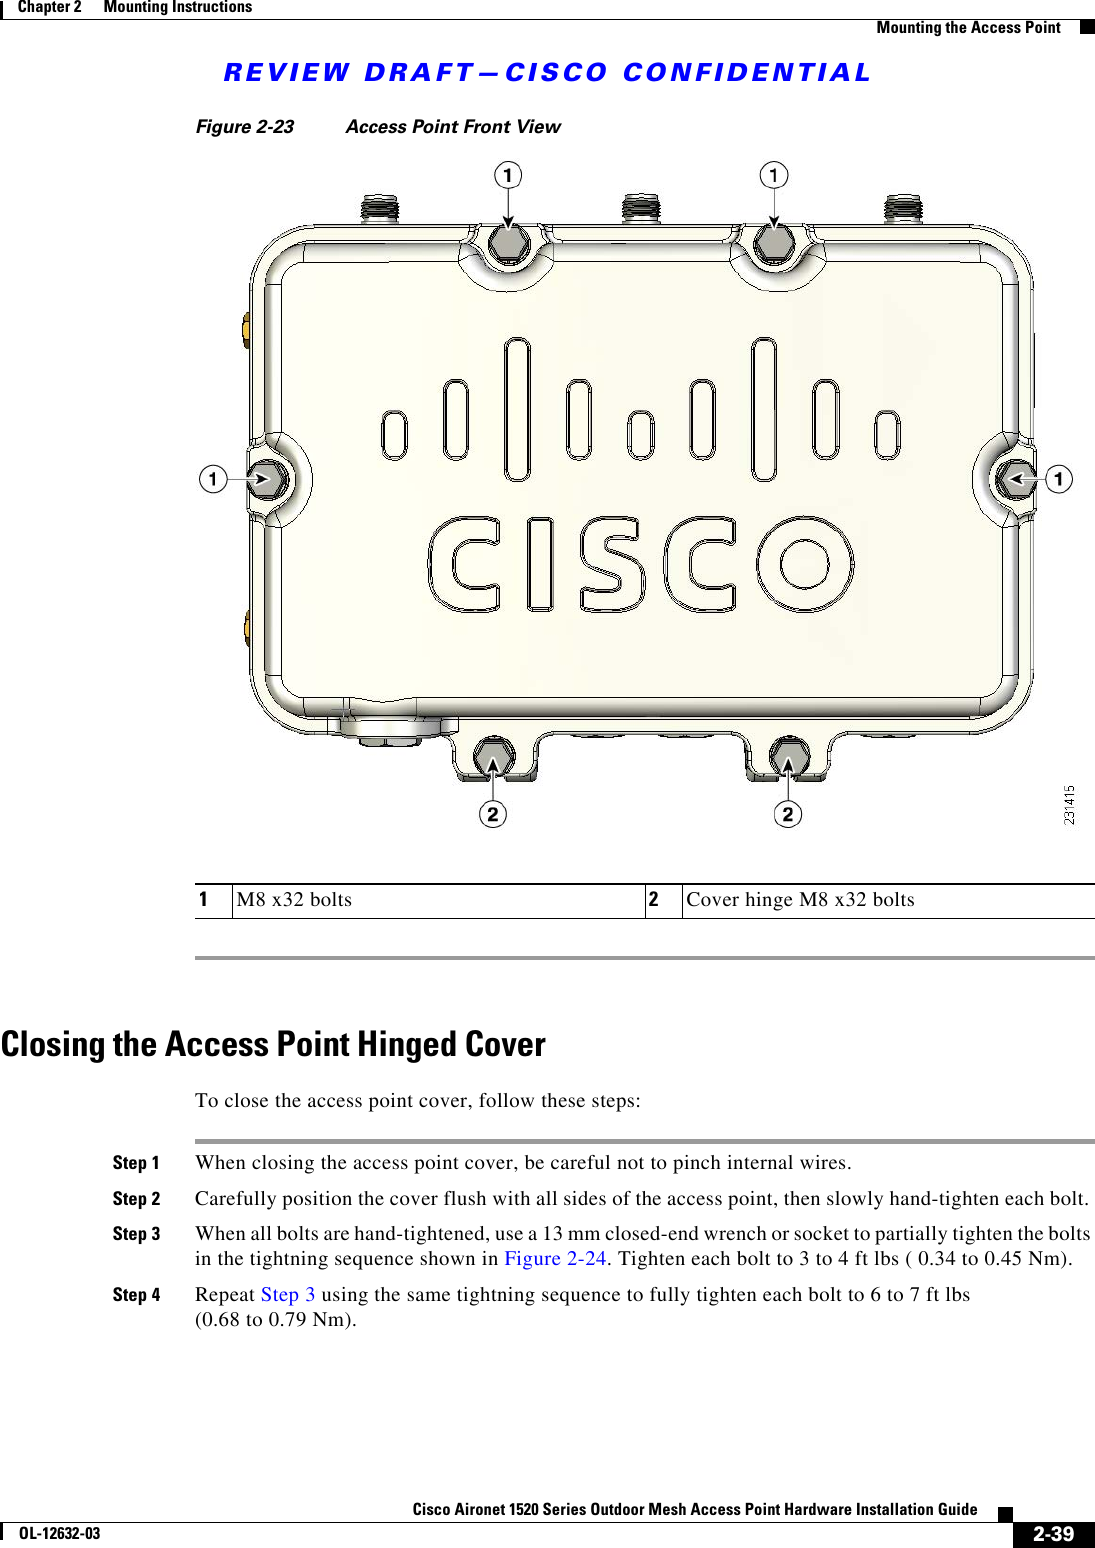 REVIEW DRAFT—CISCO CONFIDENTIAL2-39Cisco Aironet 1520 Series Outdoor Mesh Access Point Hardware Installation GuideOL-12632-03Chapter 2      Mounting Instructions  Mounting the Access PointFigure 2-23 Access Point Front ViewClosing the Access Point Hinged CoverTo close the access point cover, follow these steps:Step 1 When closing the access point cover, be careful not to pinch internal wires. Step 2 Carefully position the cover flush with all sides of the access point, then slowly hand-tighten each bolt. Step 3 When all bolts are hand-tightened, use a 13 mm closed-end wrench or socket to partially tighten the bolts in the tightning sequence shown in Figure 2-24. Tighten each bolt to 3 to 4 ft lbs ( 0.34 to 0.45 Nm).Step 4 Repeat Step 3 using the same tightning sequence to fully tighten each bolt to 6 to 7 ft lbs  (0.68 to 0.79 Nm).1M8 x32 bolts 2Cover hinge M8 x32 bolts